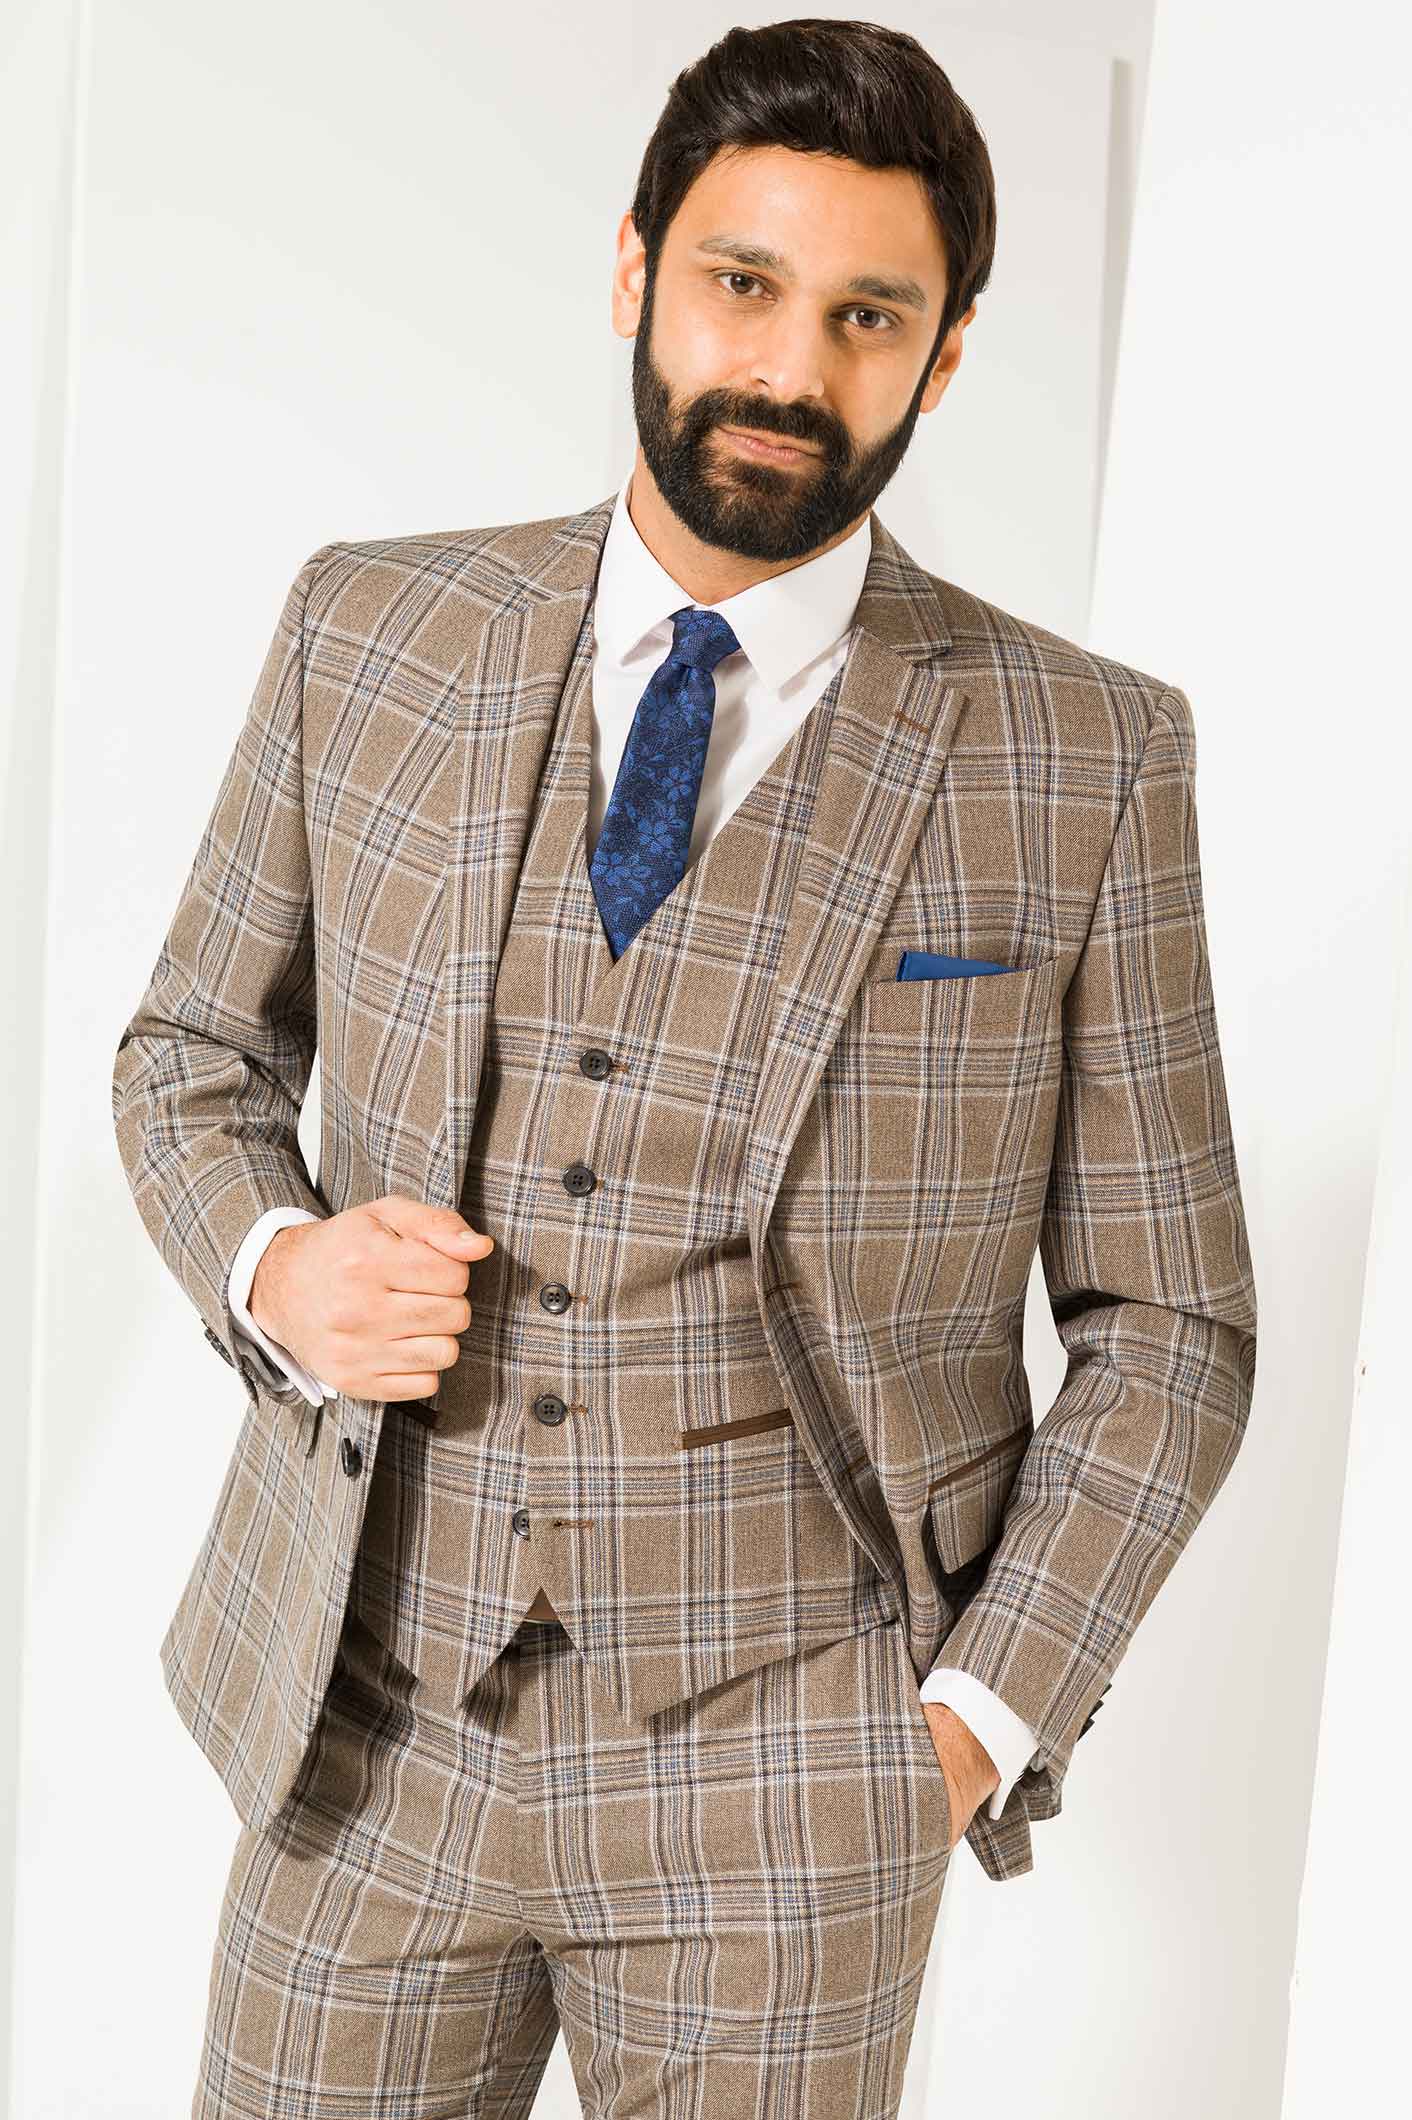 Brown and blue checked suit